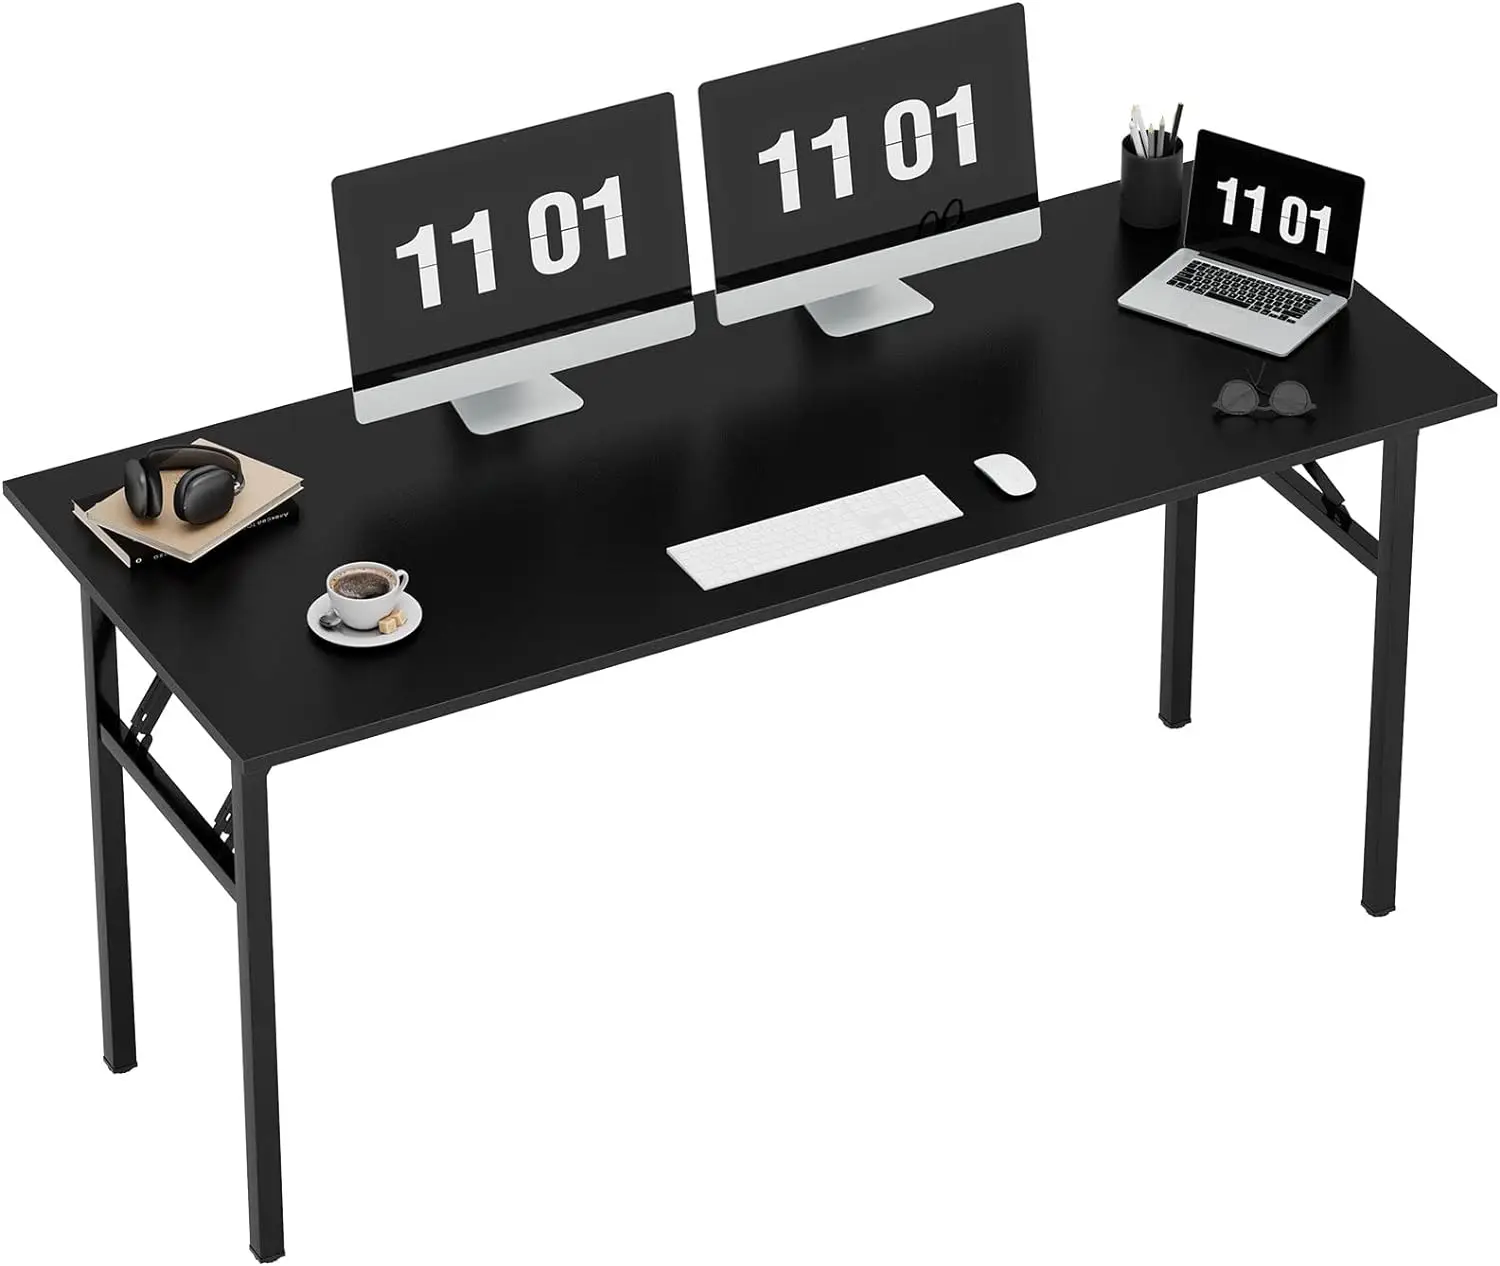 

Need Computer Desk Office Desk 62 inches Folding Table with BIFMA Certification Computer Table Dining Table No Install Needed,